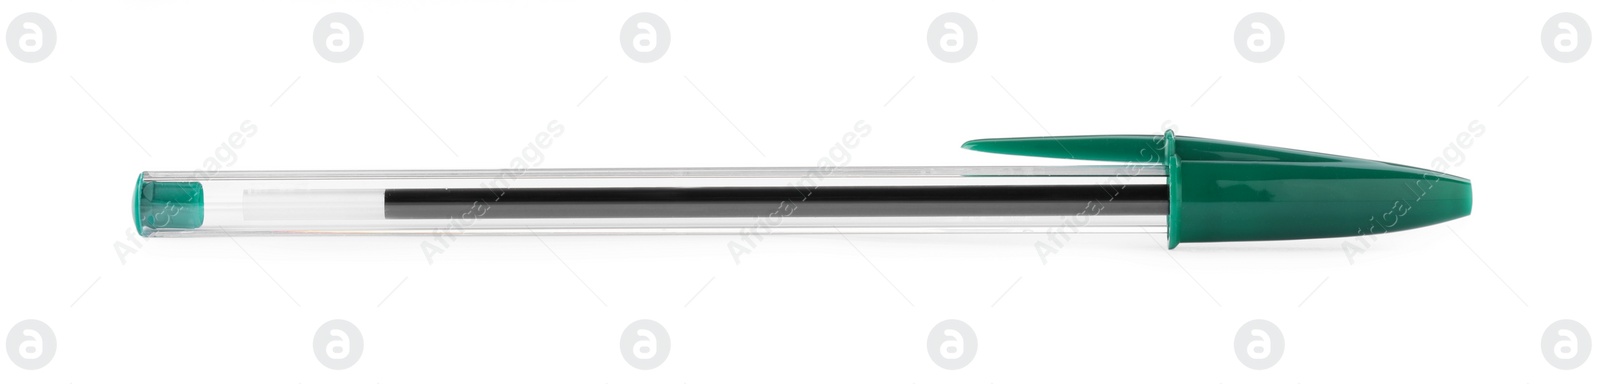 Photo of New green plastic pen isolated on white